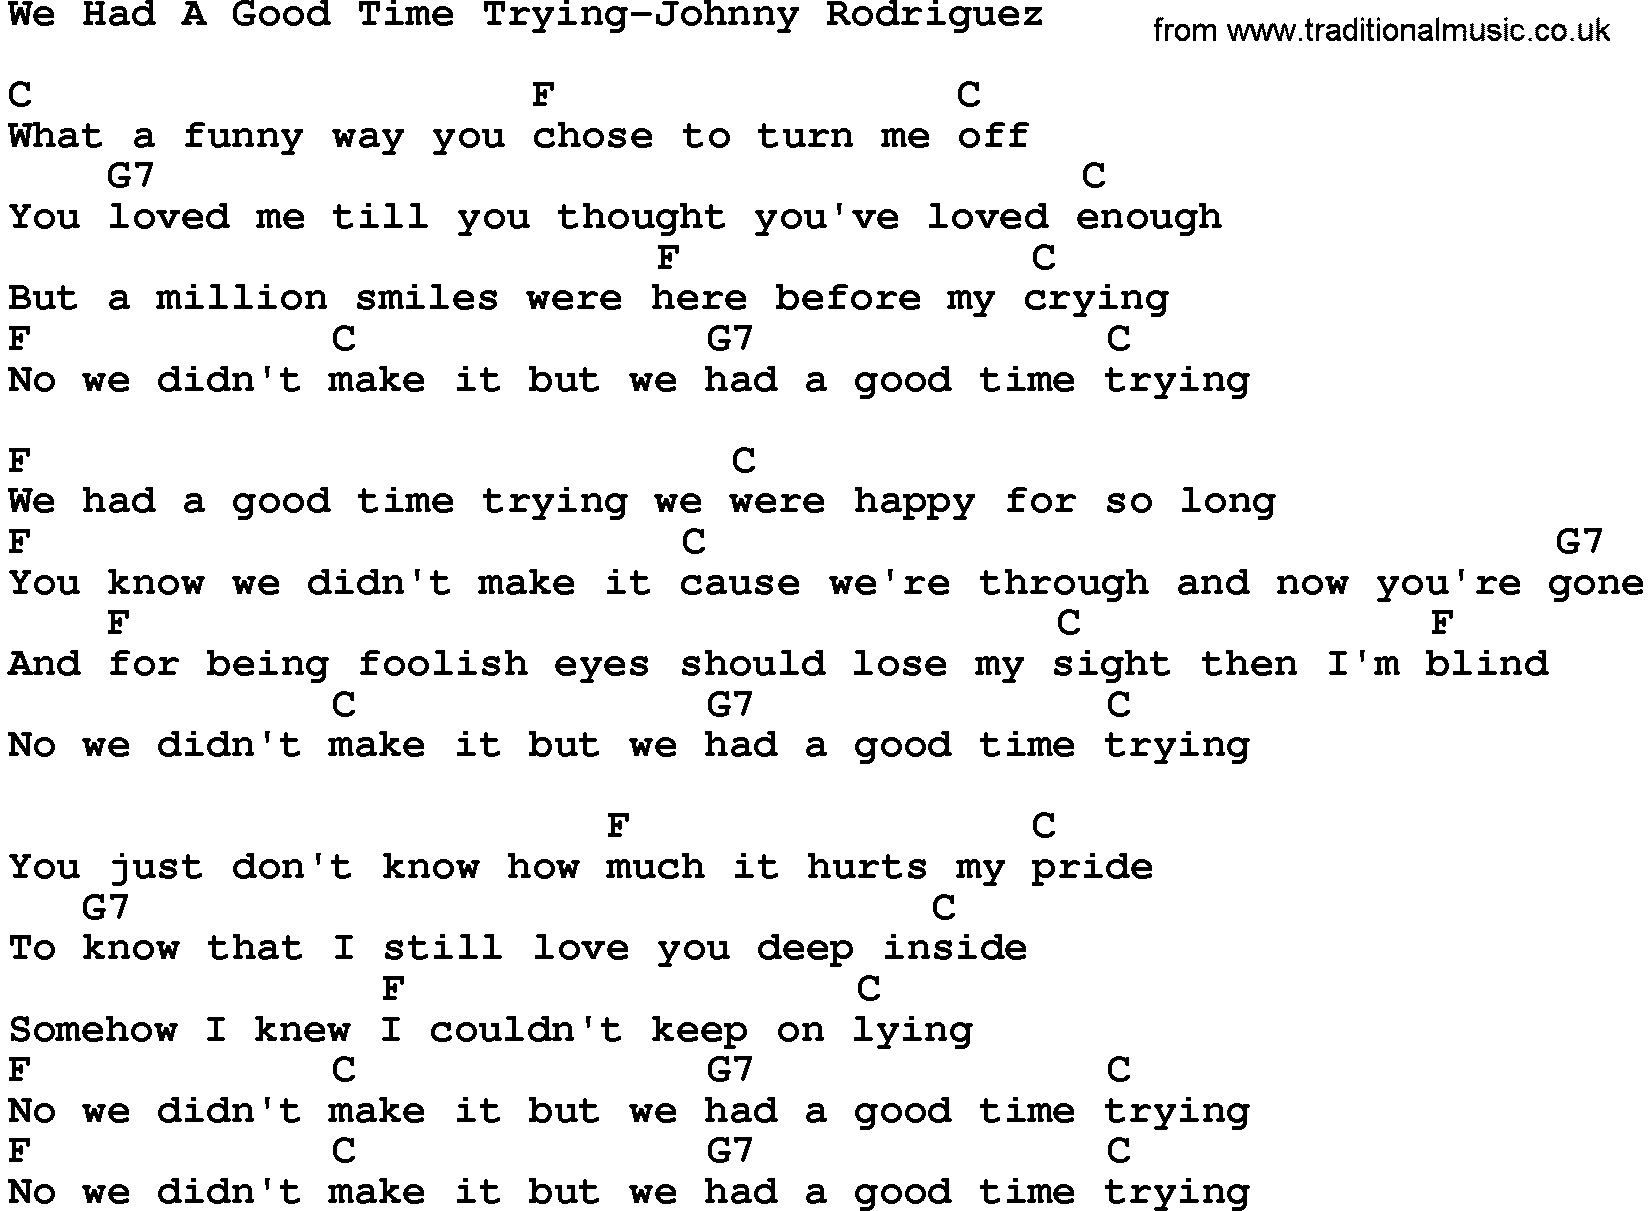 Country music song: We Had A Good Time Trying-Johnny Rodriguez lyrics and chords